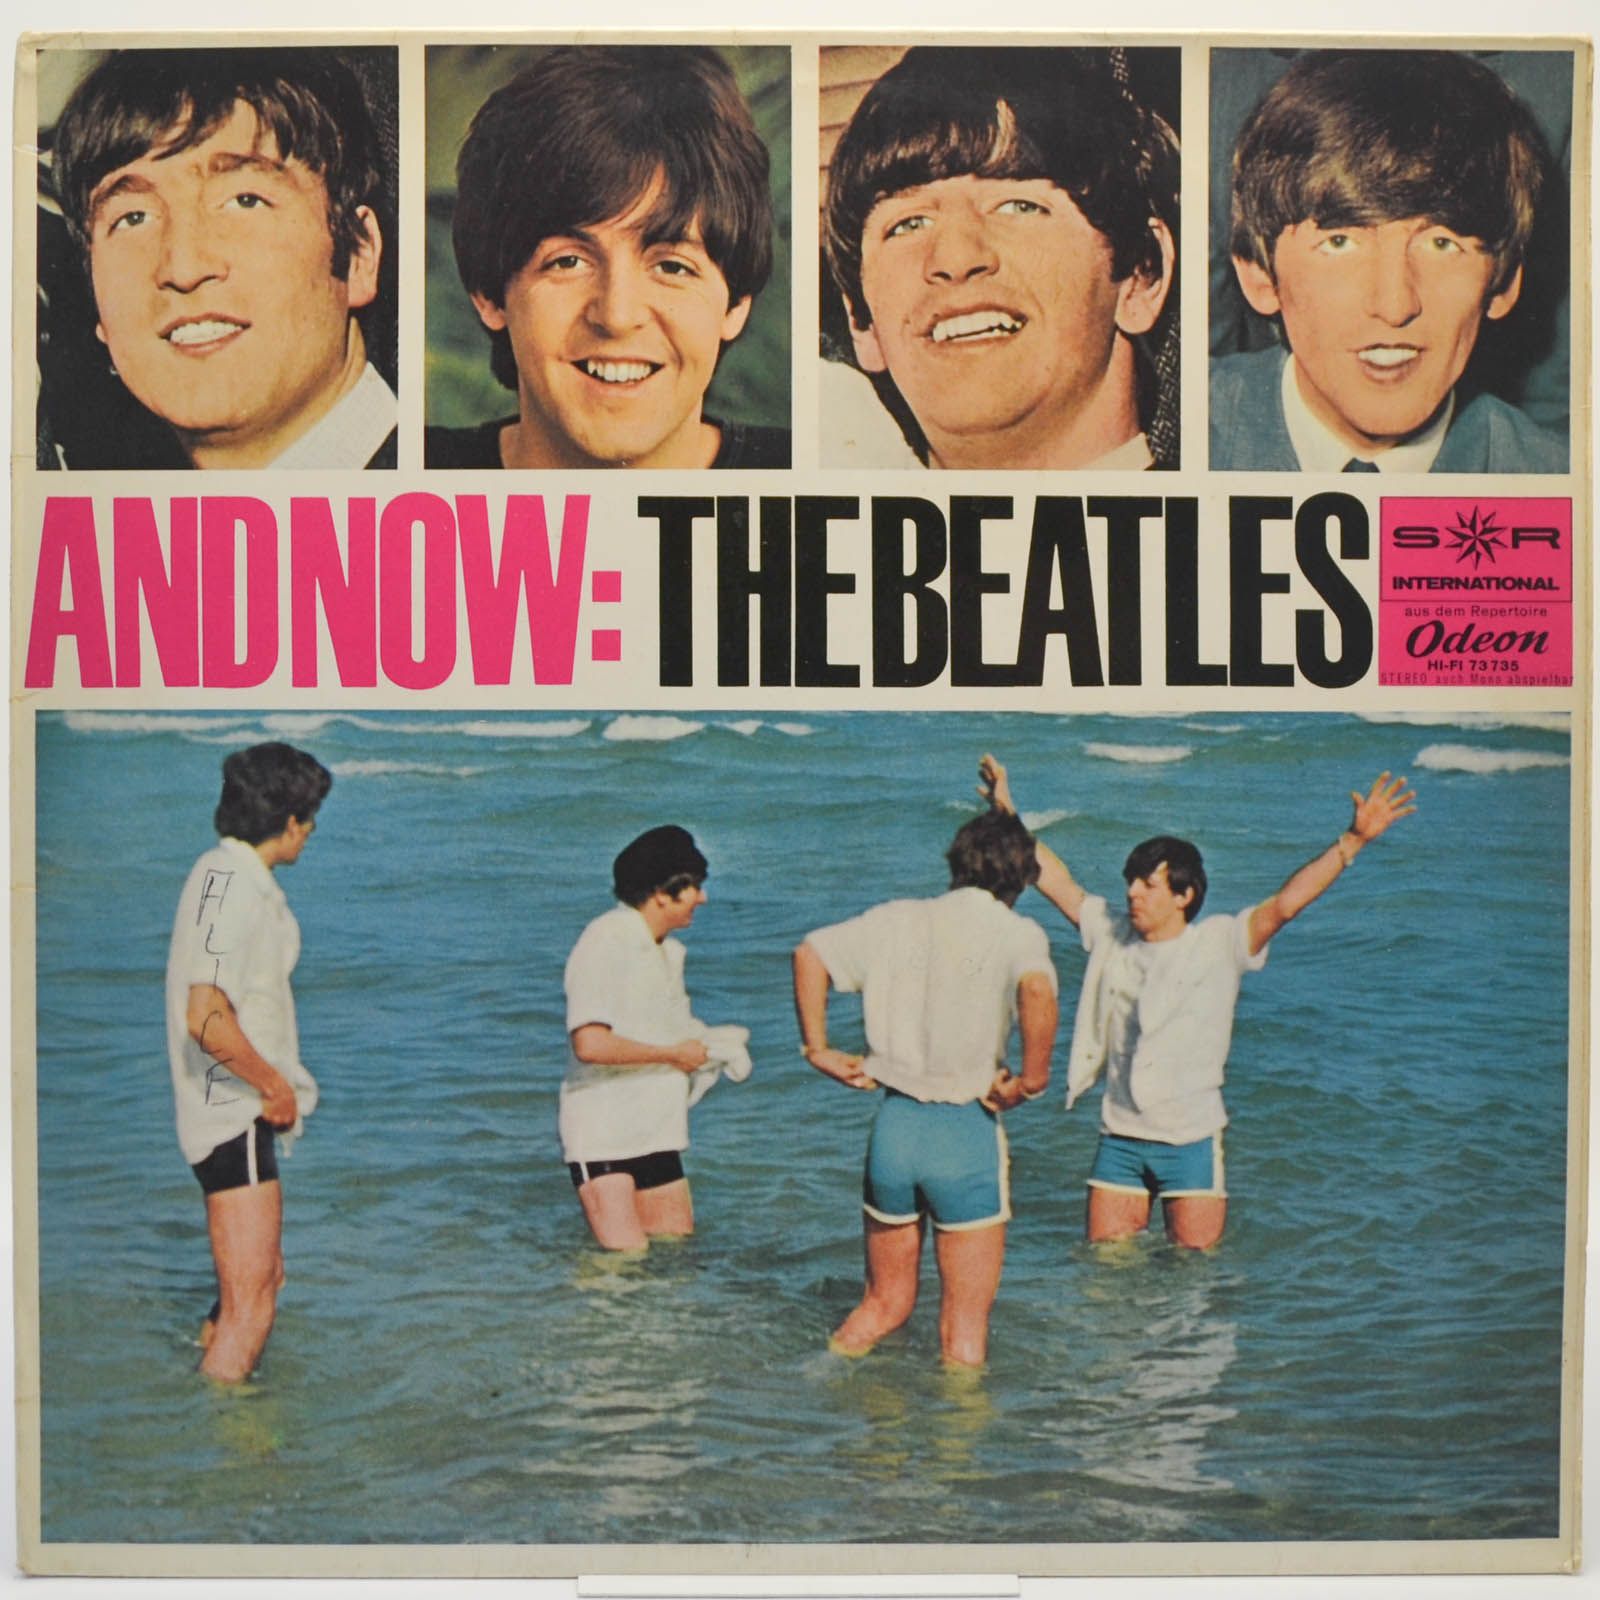 Beatles — And Now: The Beatles, 1966